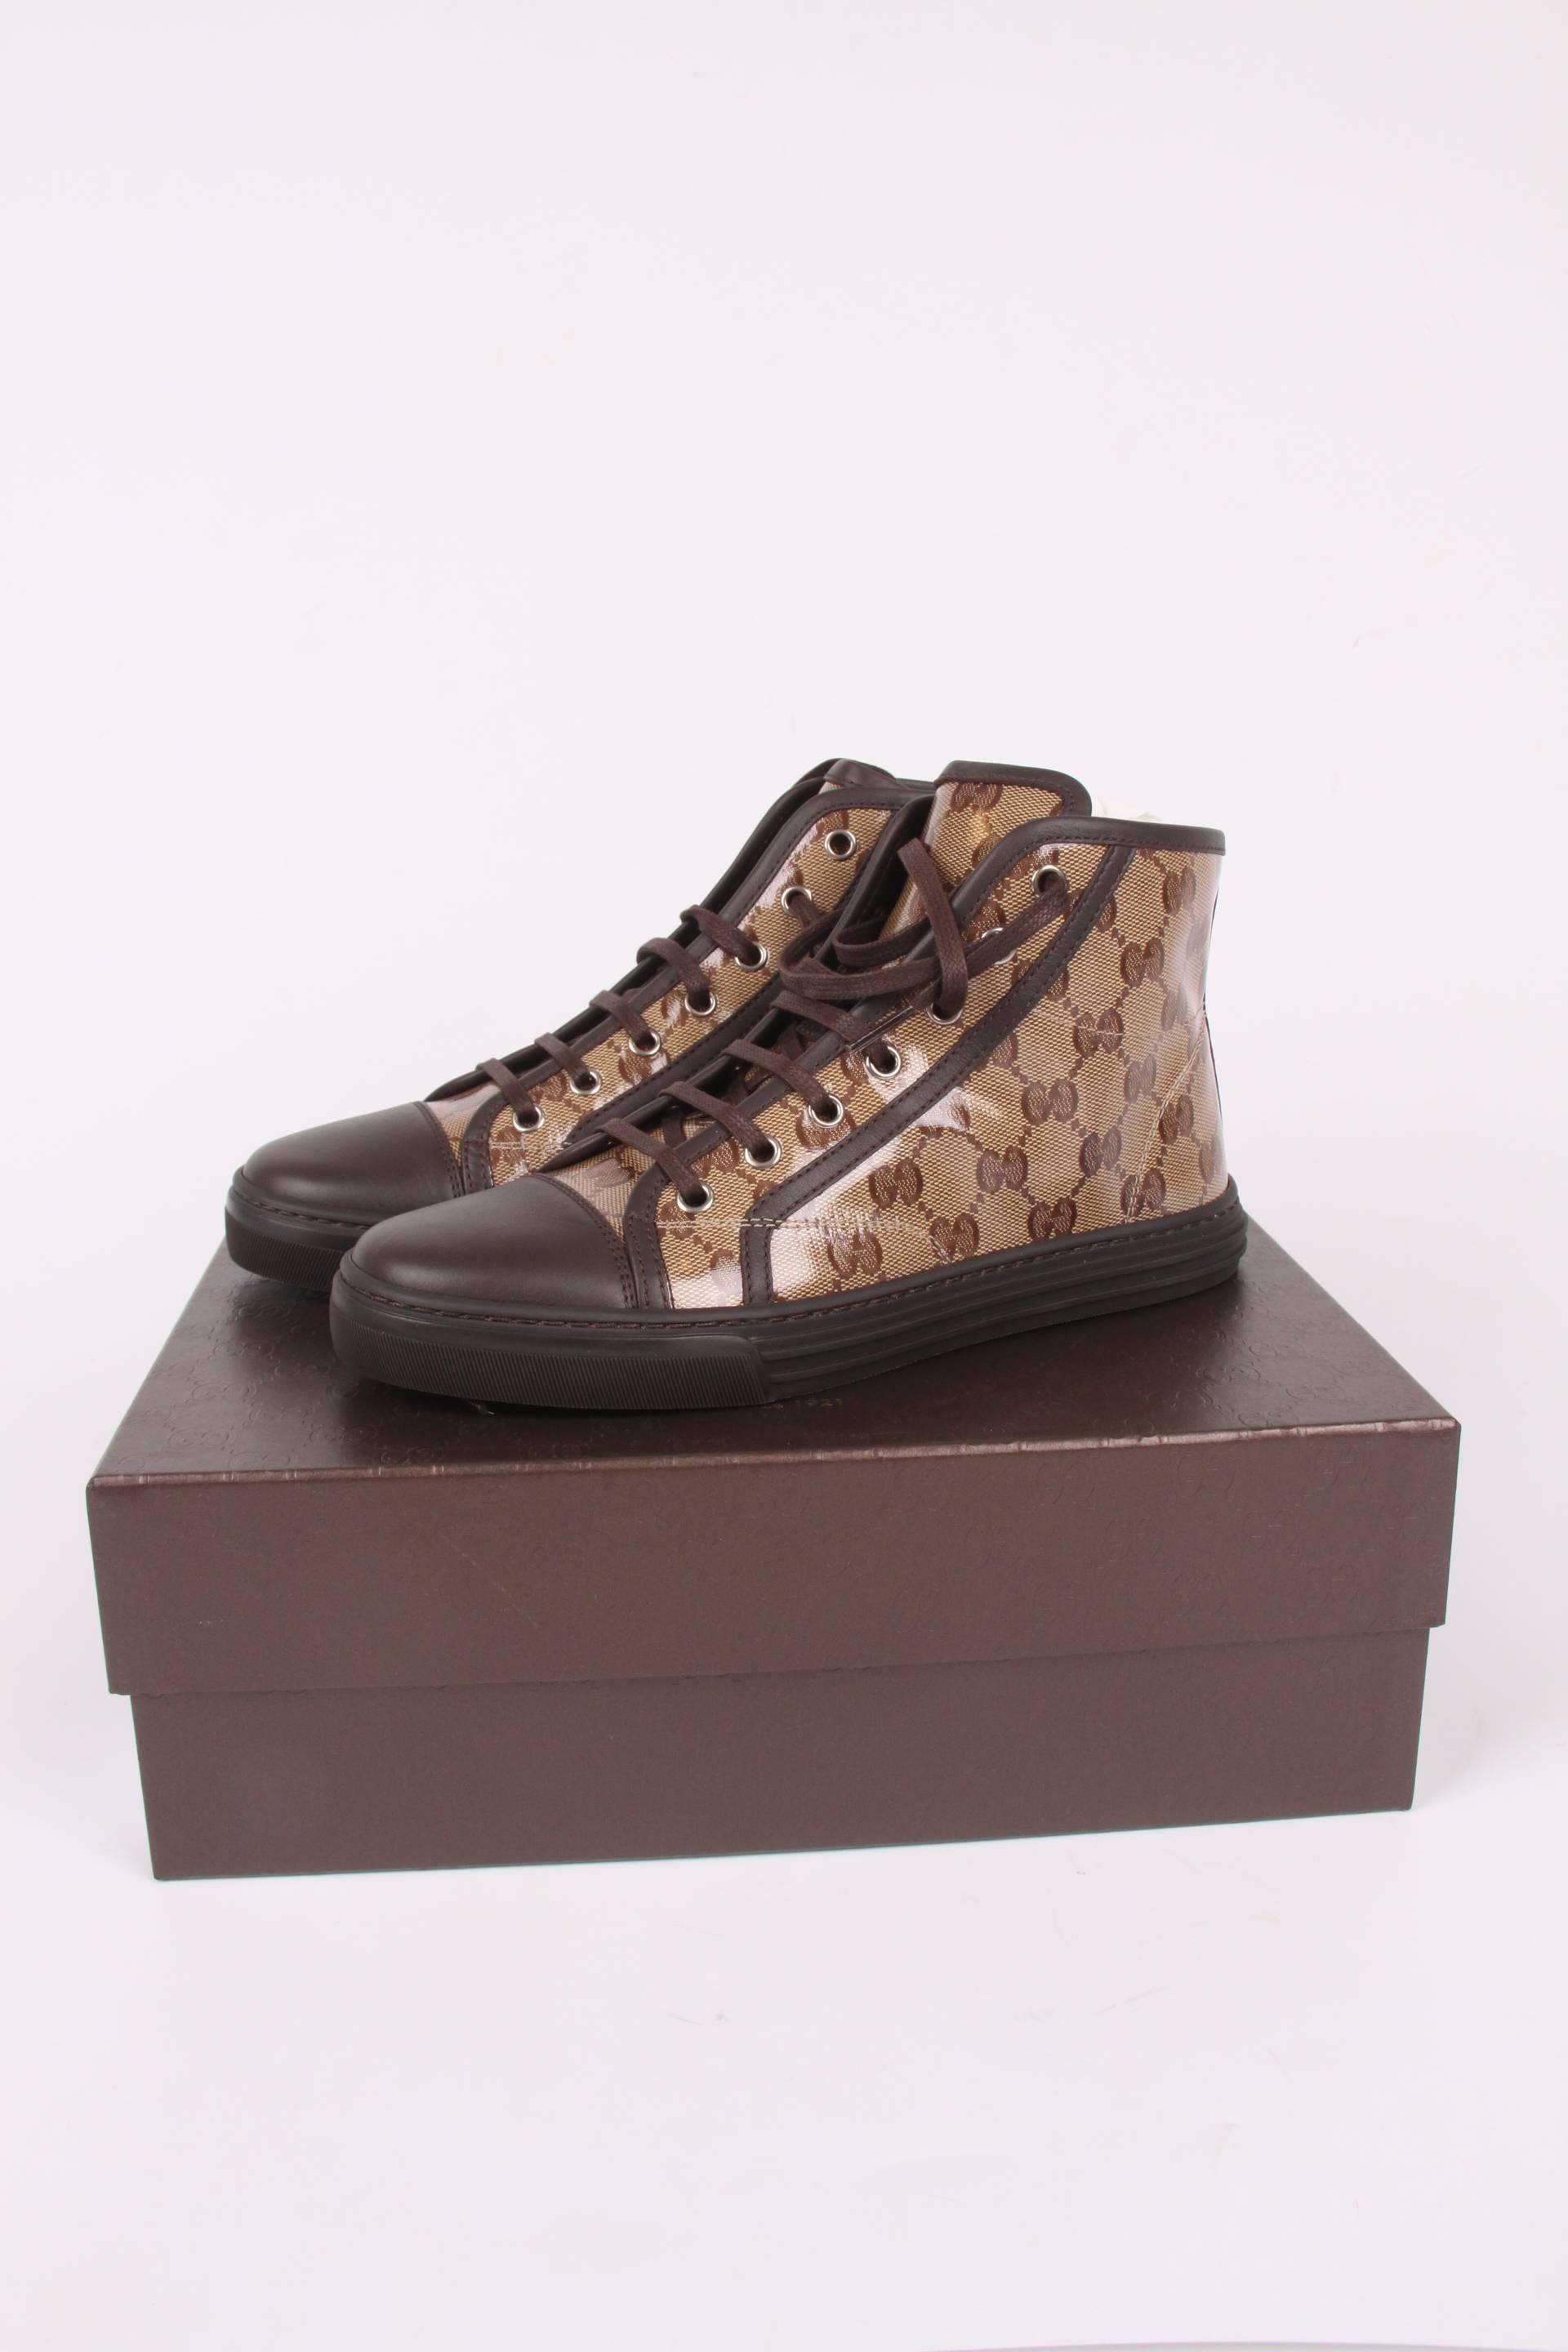 Sporty sneakers by Gucci; sturdy and yet elegant.

The coated canvas is decorated with the Guccissima pattern, detaling in dark brown leather. The laces and rubber outsole are also  excecuted in black. Fully lined with dark brown leather.